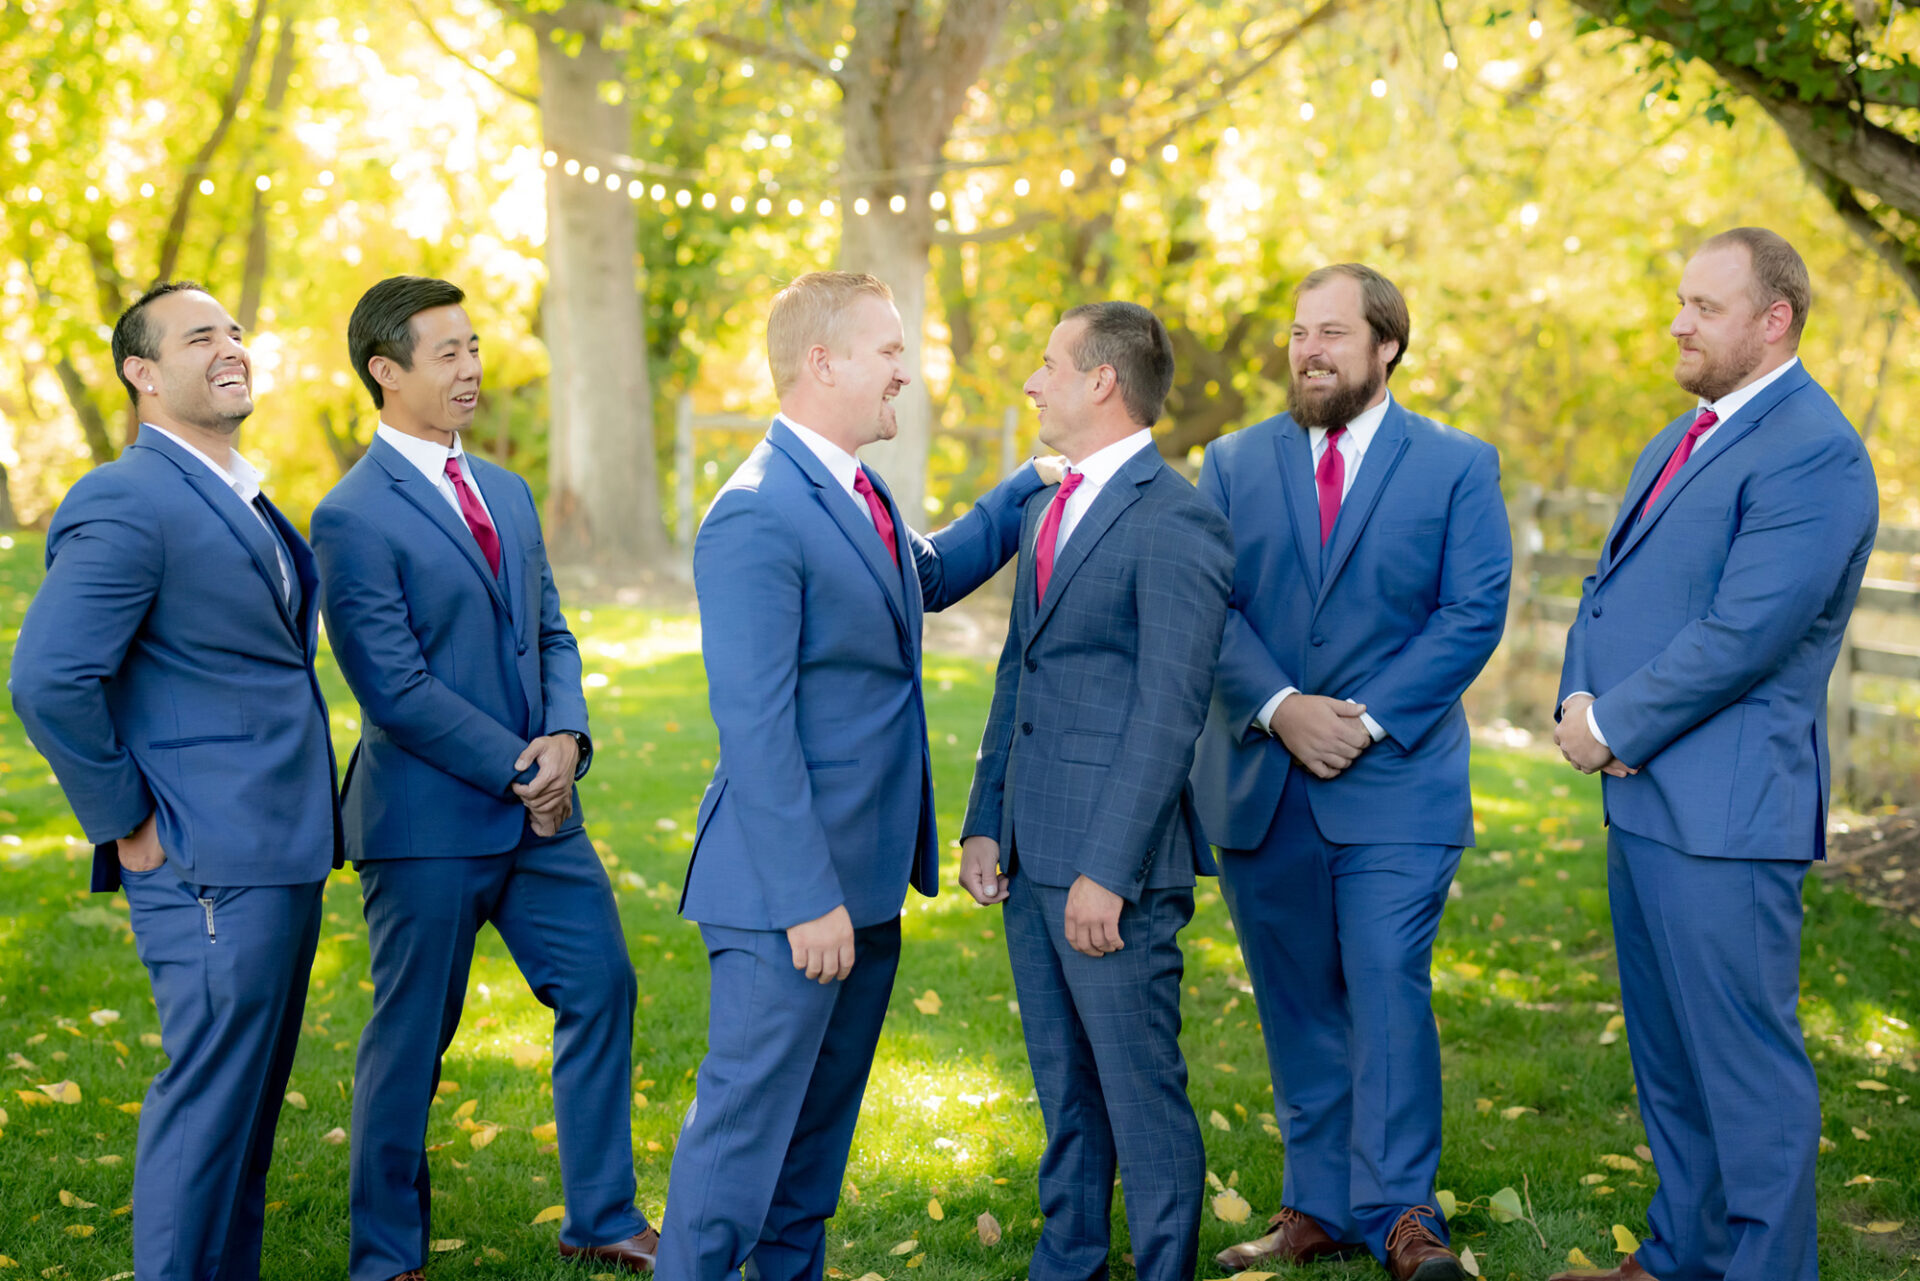 Groom in a navy-blue suit talking to his groomsmen who are dressed in light blue suits